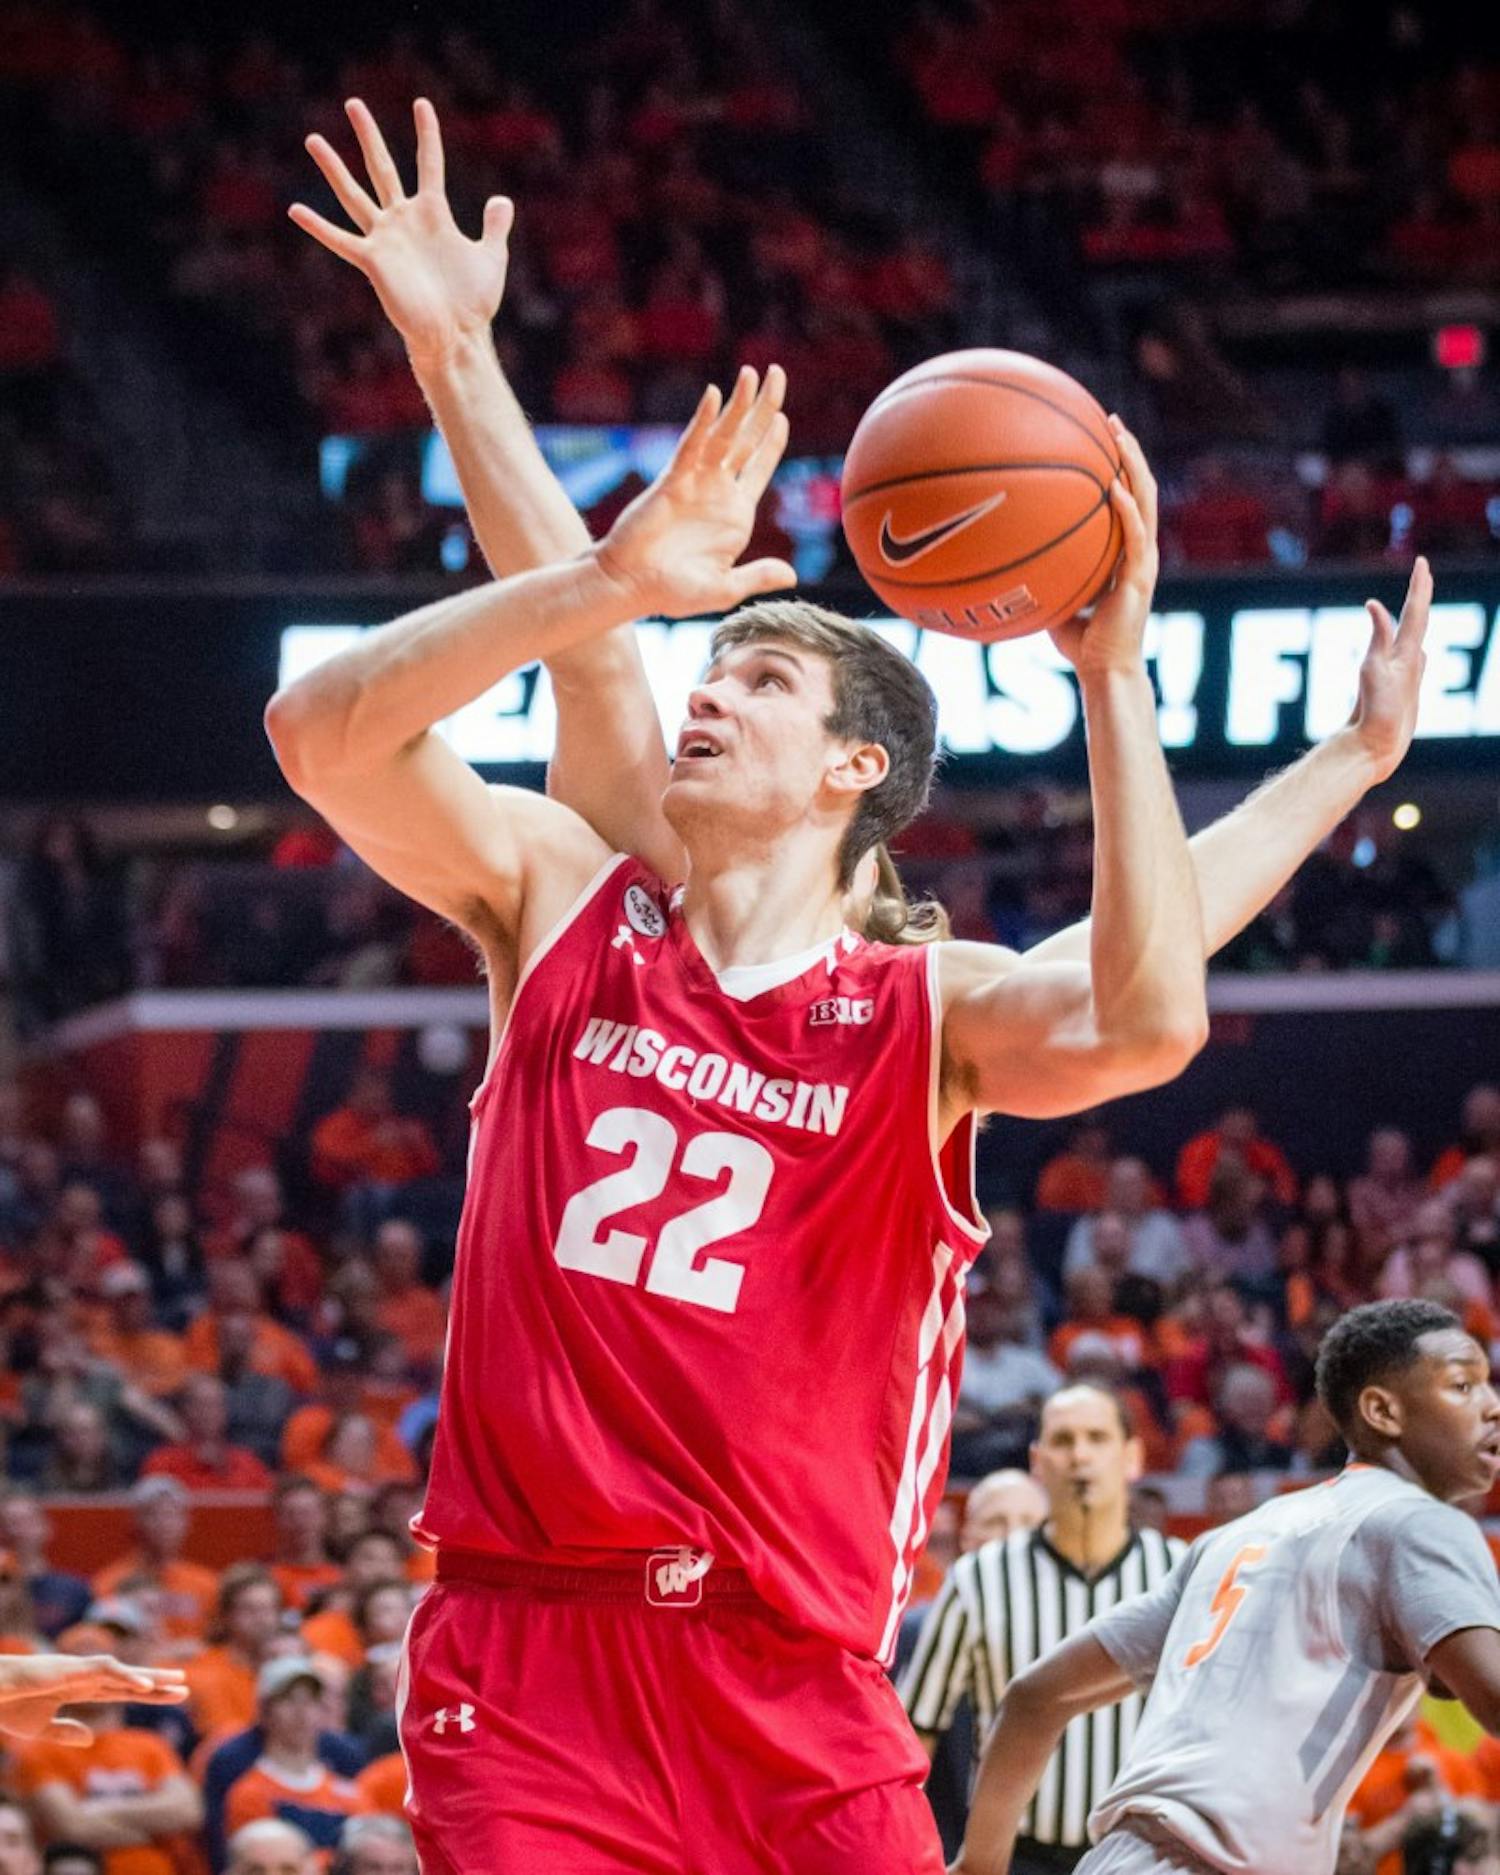 Wisconsin's Ethan Happ (22) goes up for a layup during the game against Illinois at State Farm Center on Tuesday, January 31.